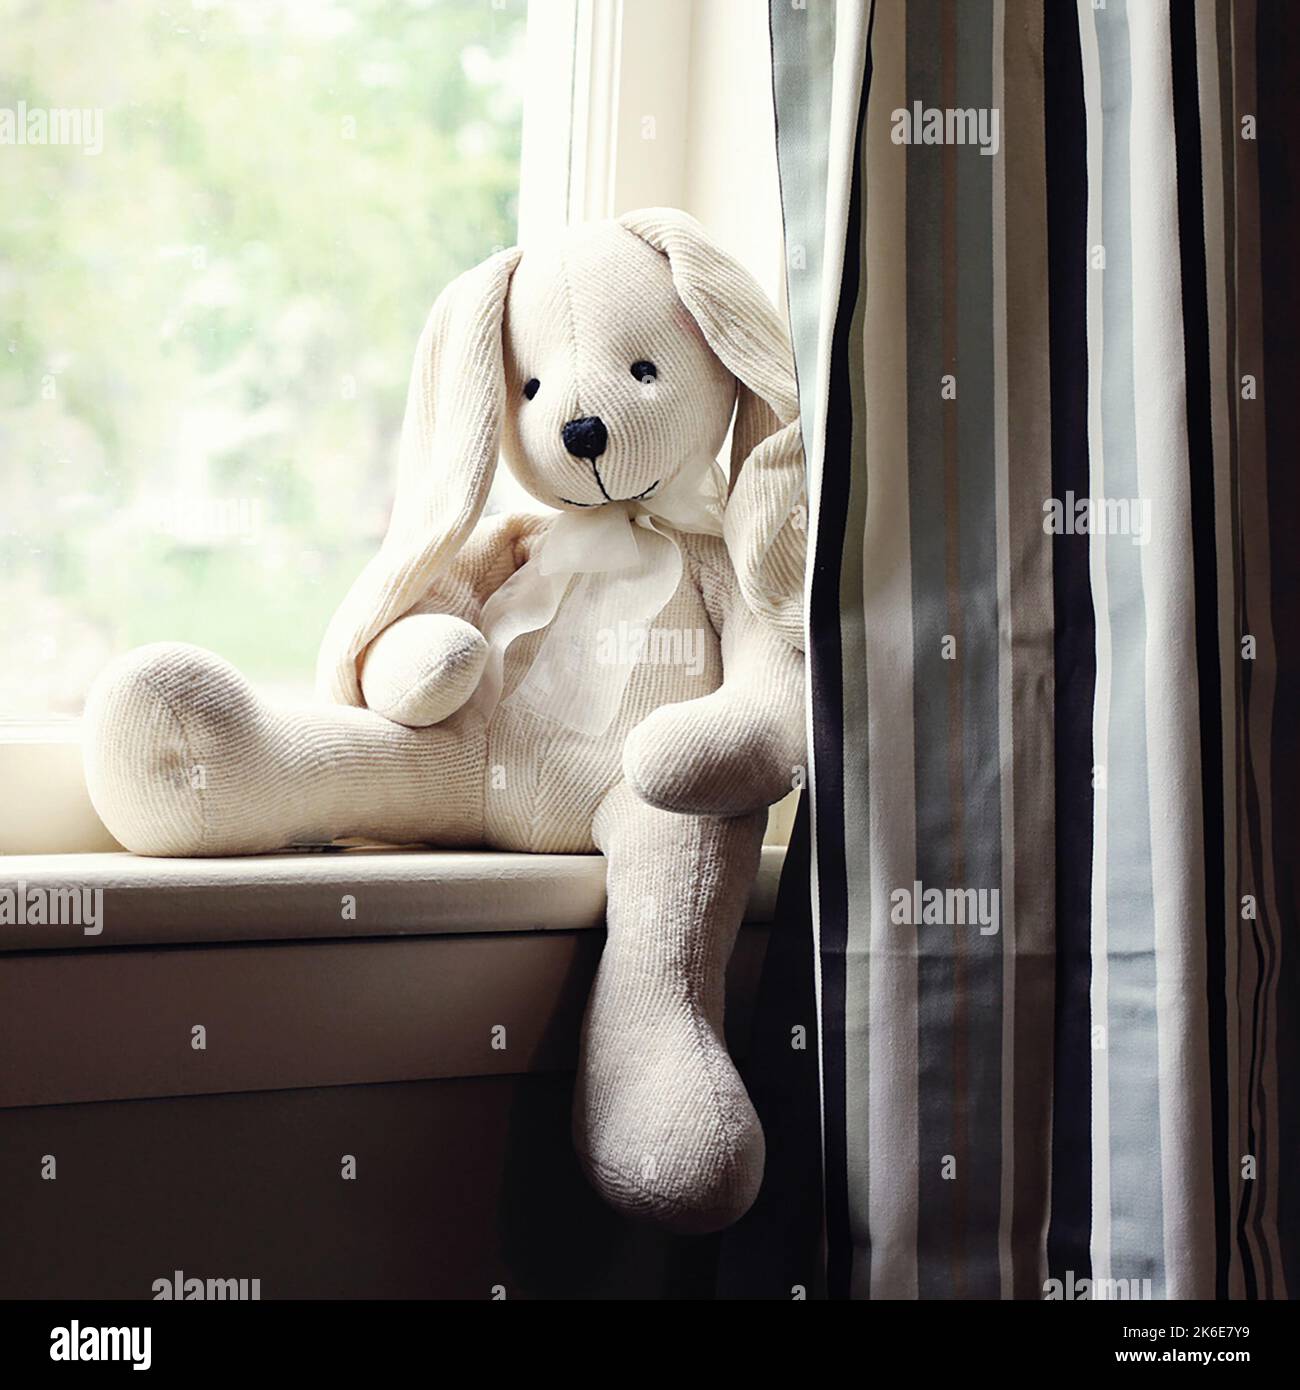 A soft white and cream stuffed animal rabbit keeps watch sitting in the window with outside light Stock Photo